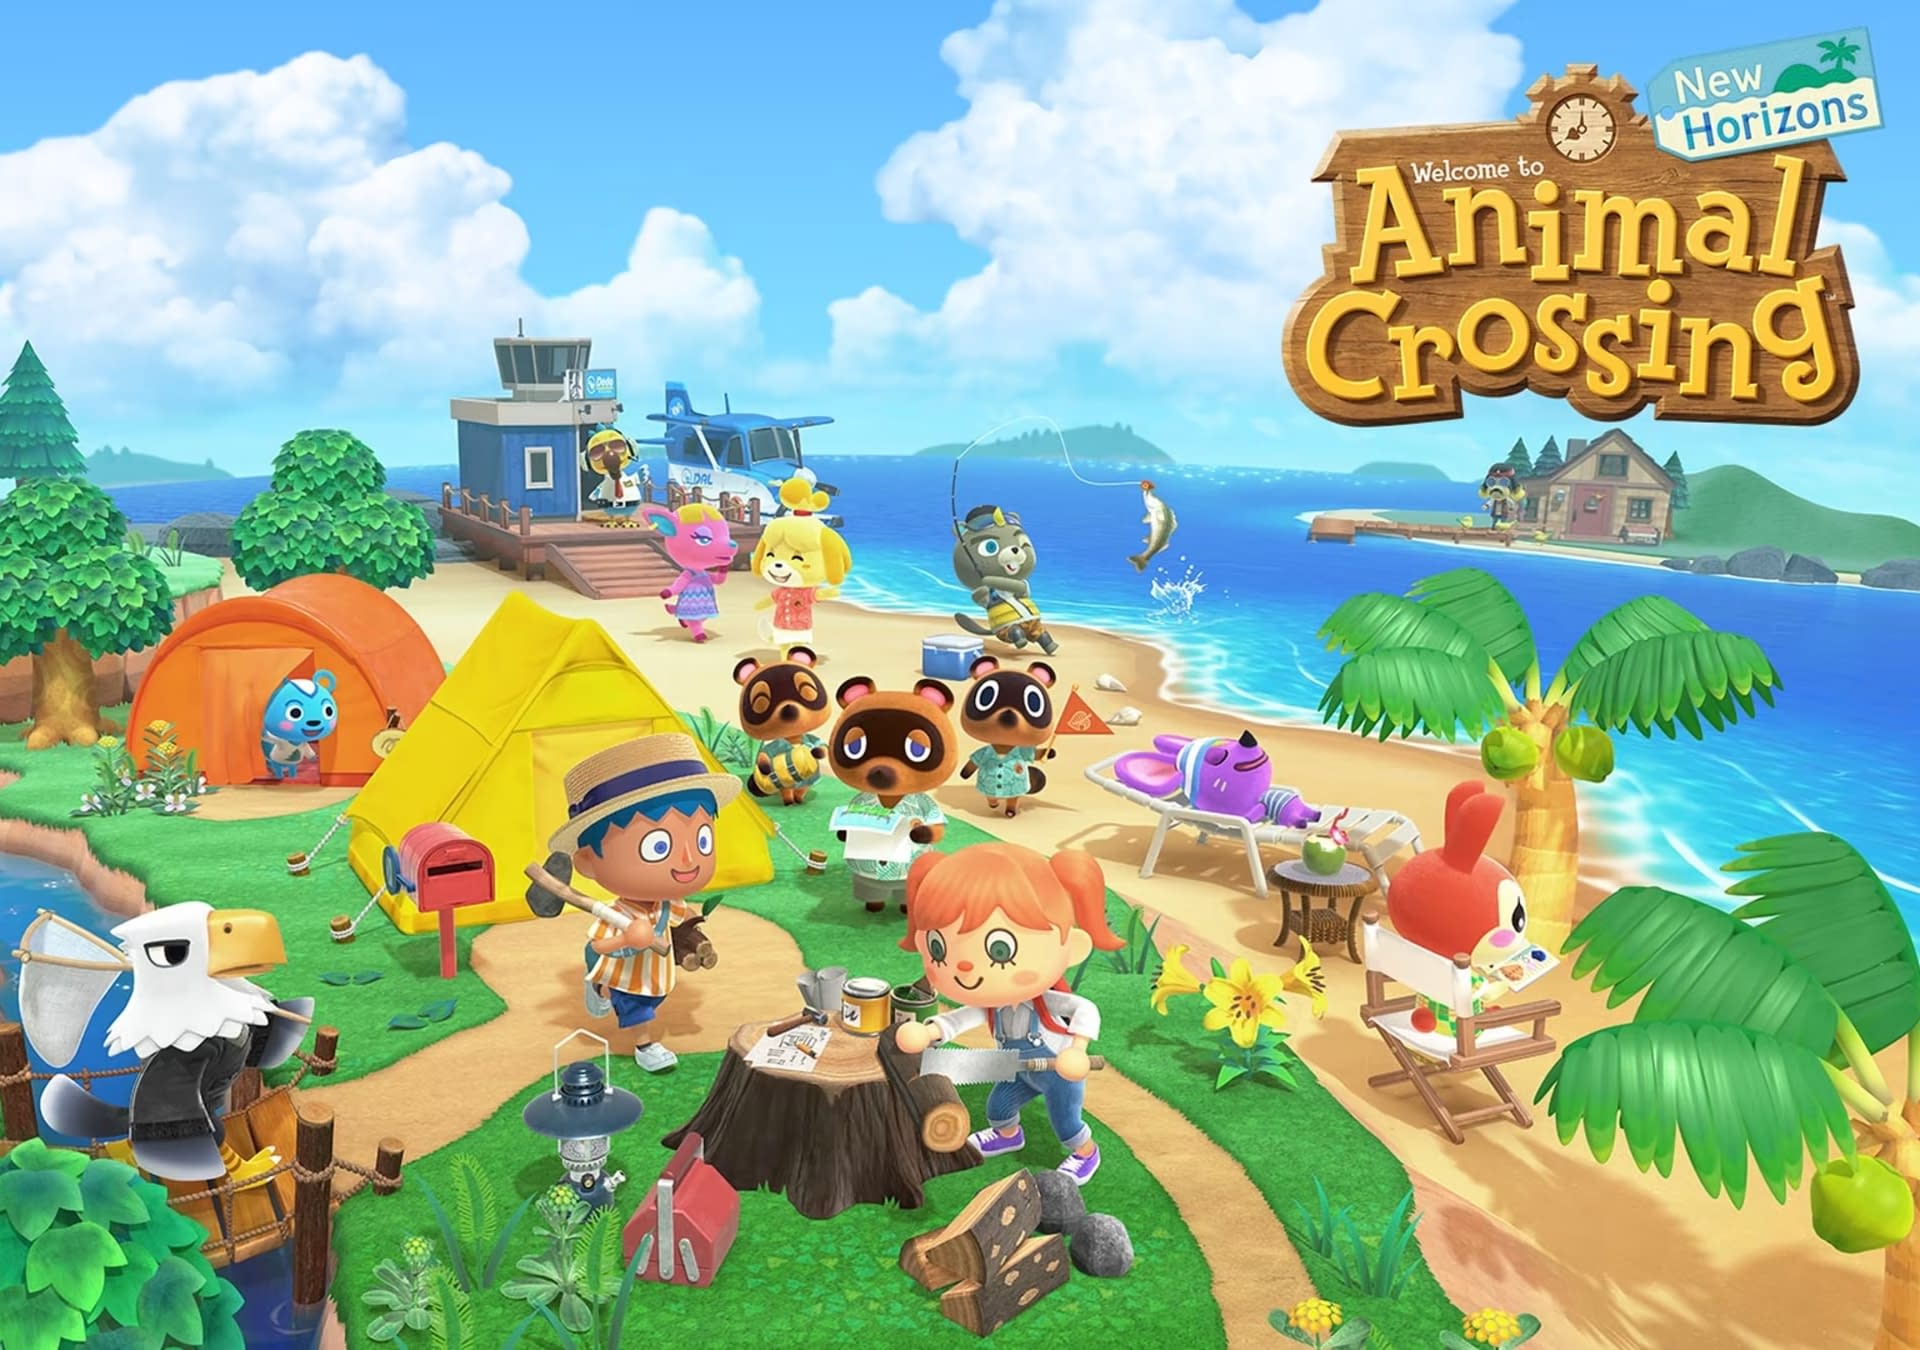 Animal Crossing: New Horizons Becomes the Best-Selling Game of All Time in Japan